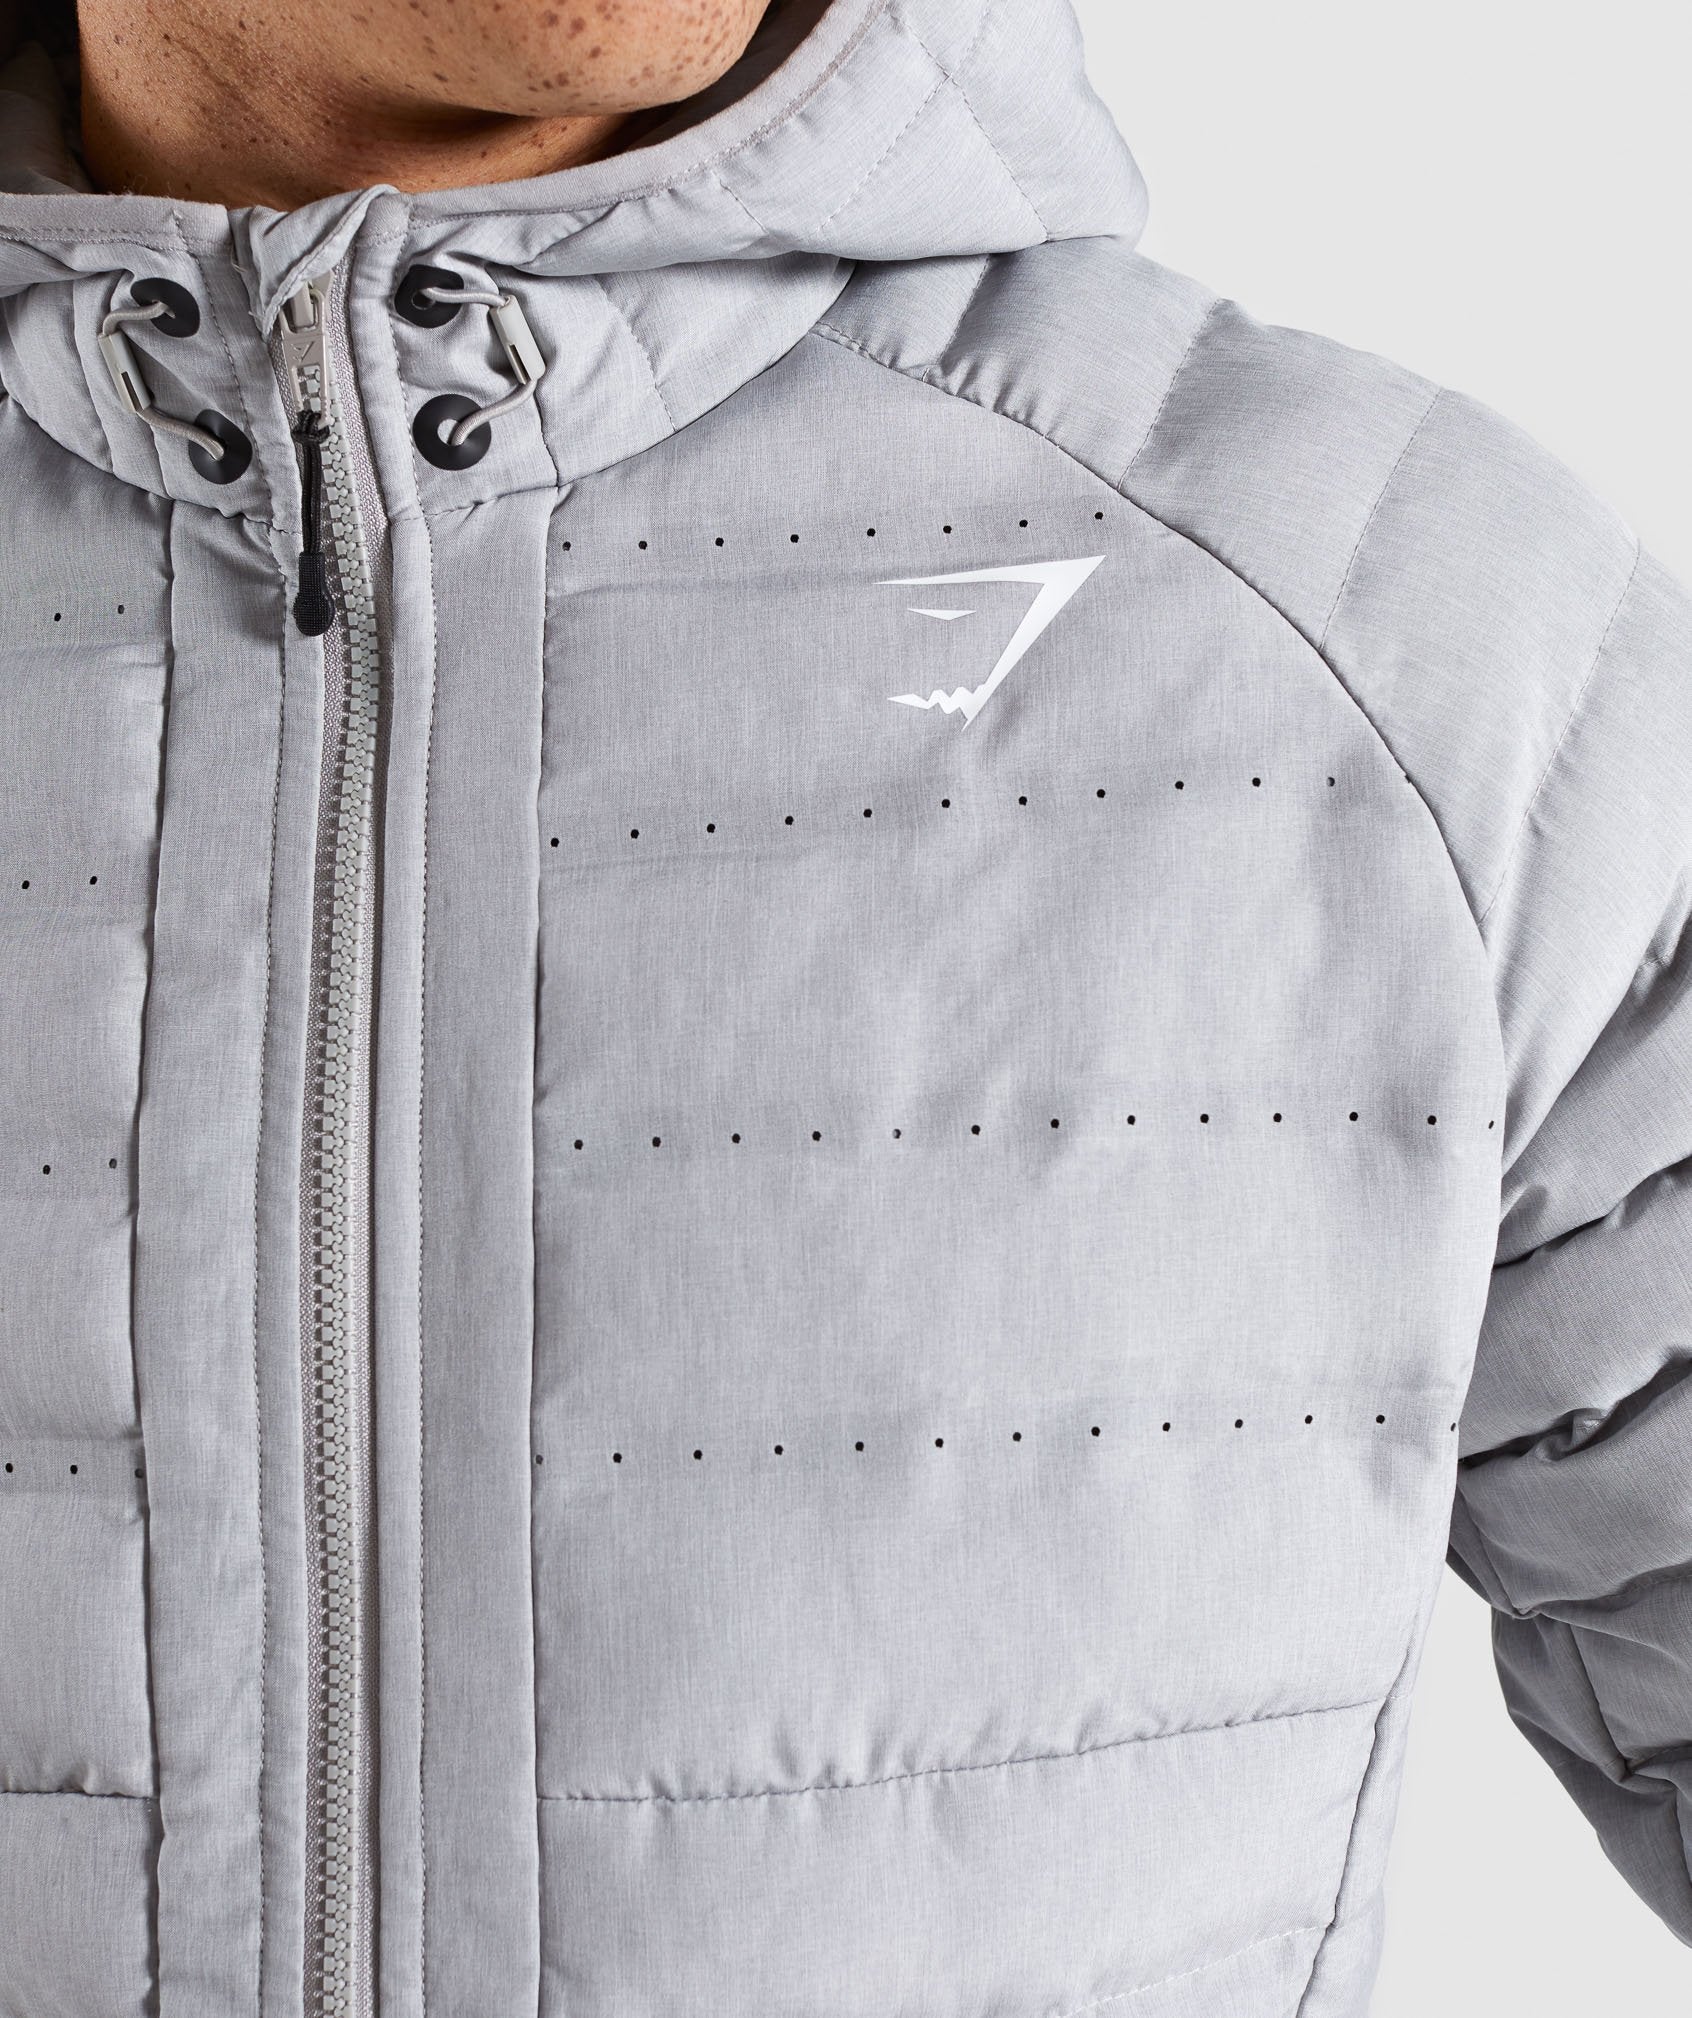 Sector Jacket V2 in Light Grey - view 5